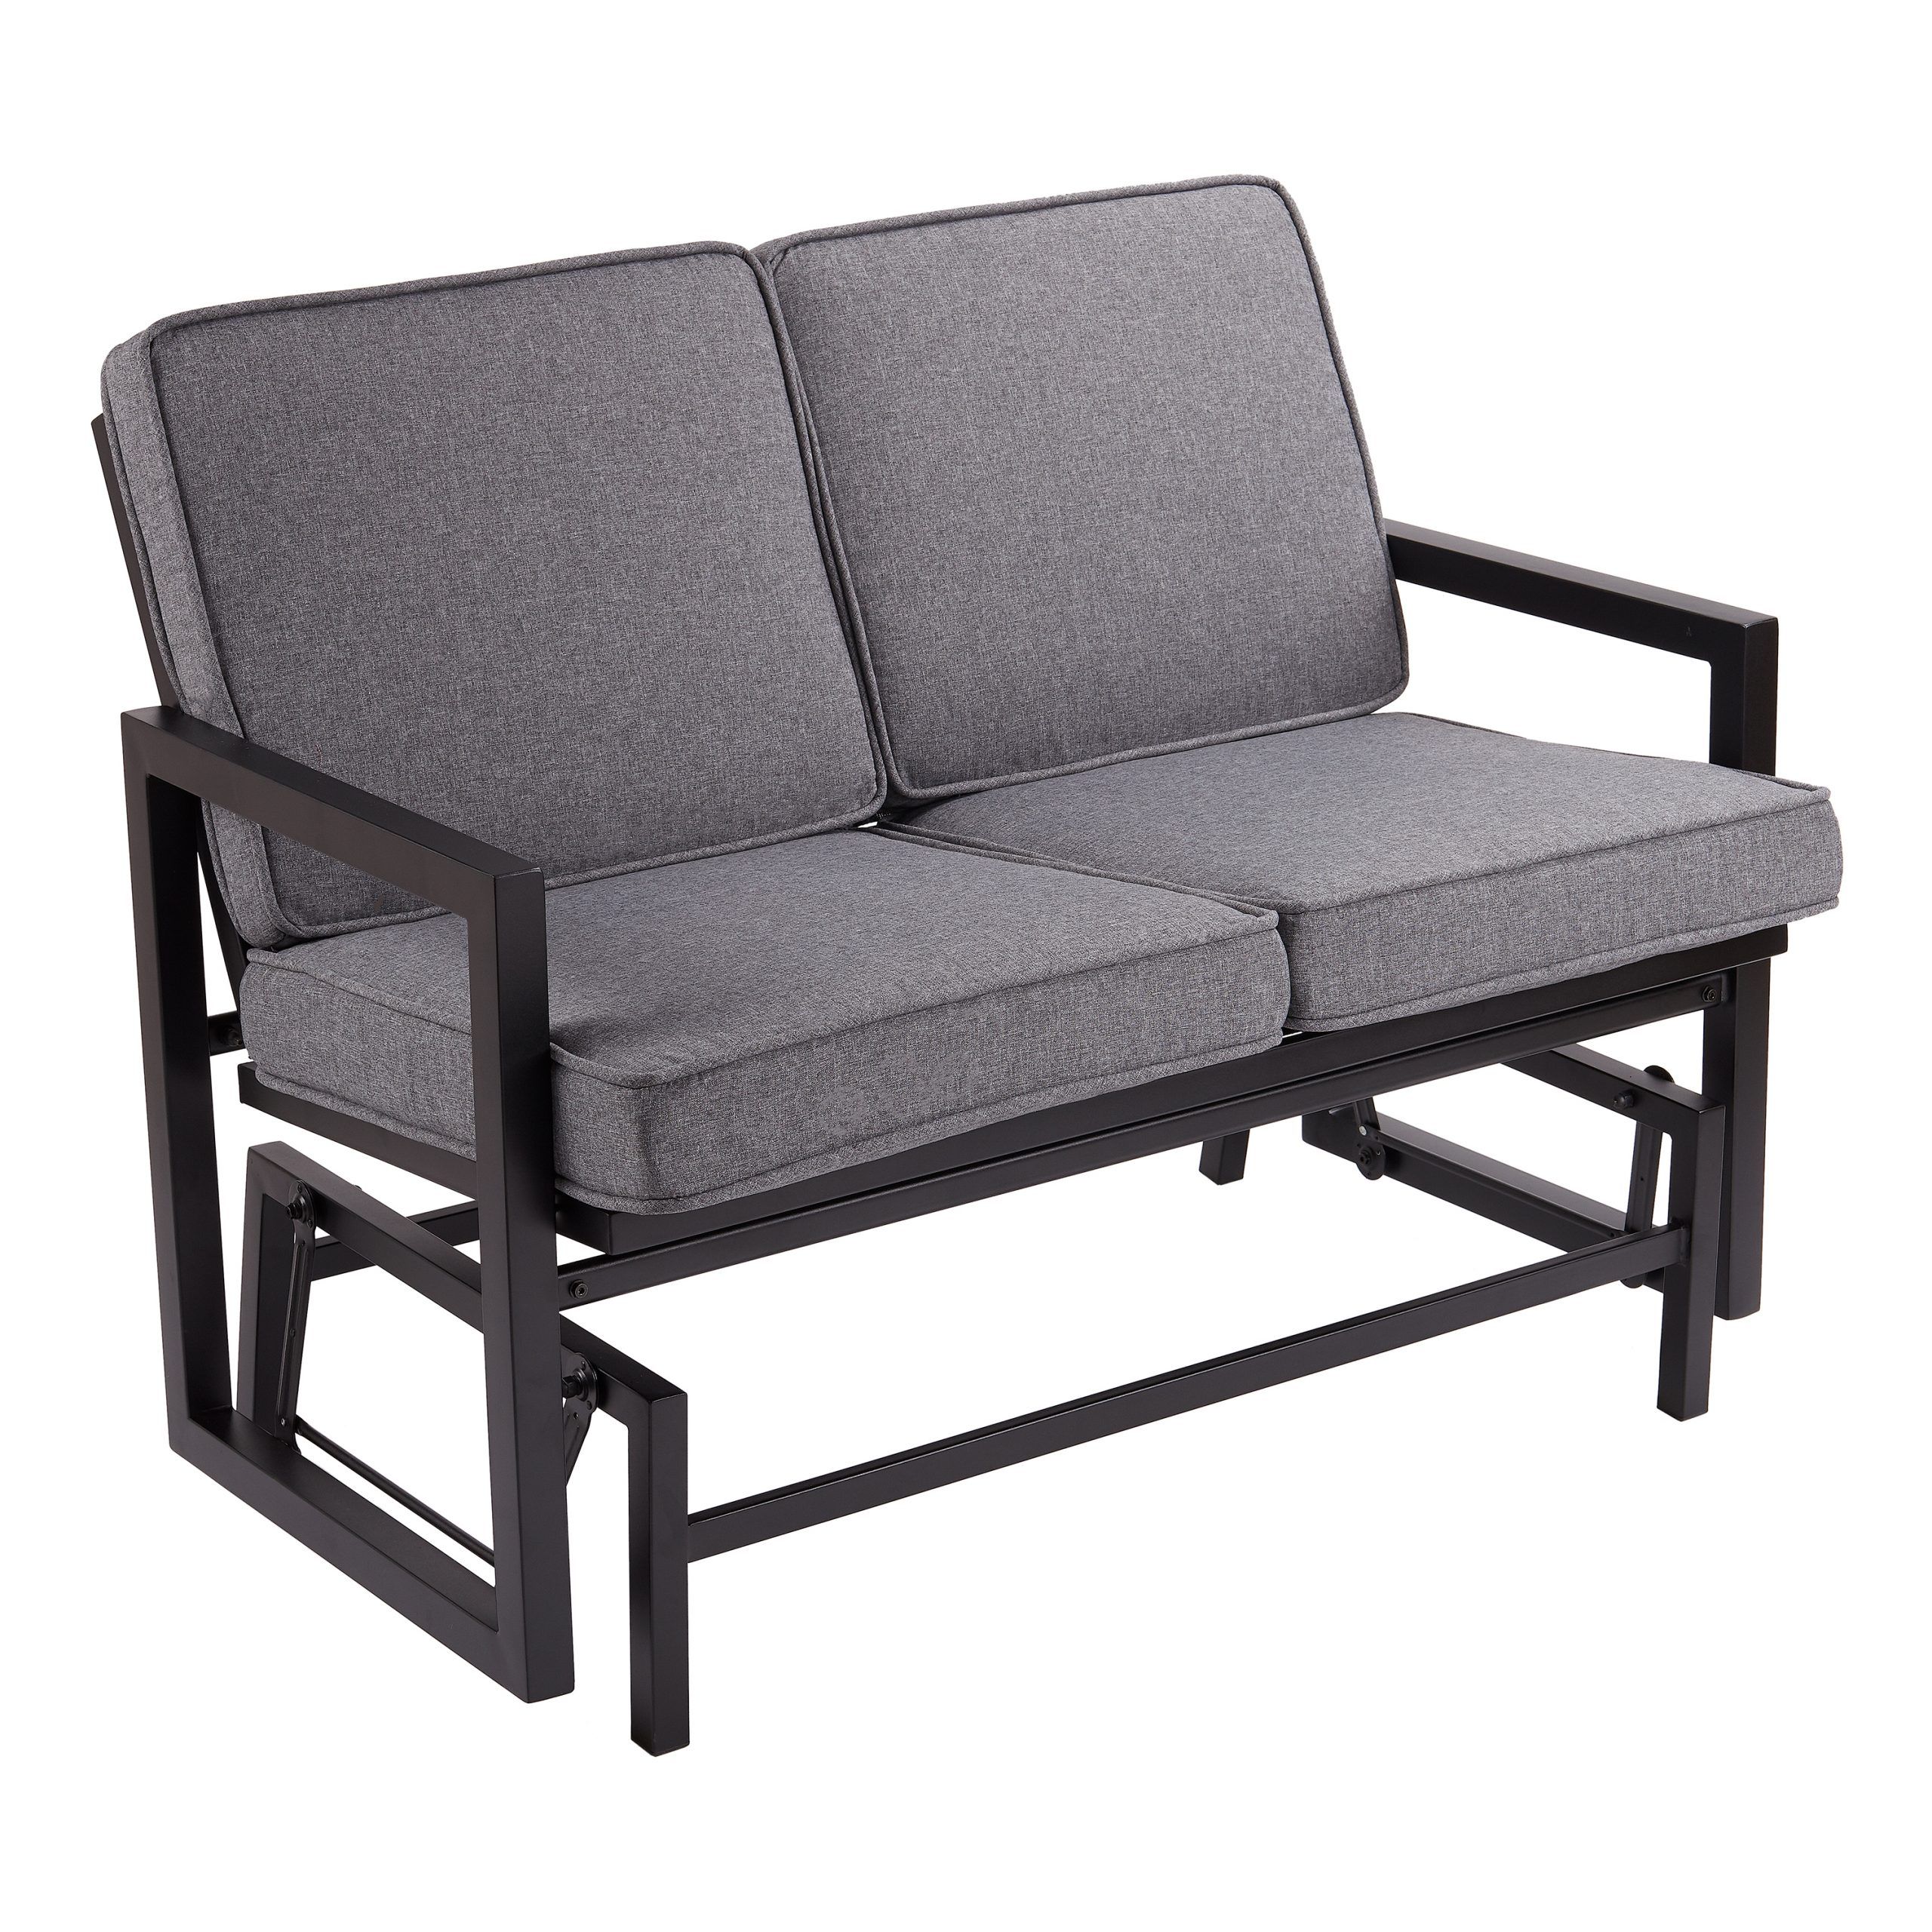 Outdoor Loveseat Gliders With Cushion For Current Mainstays Moss Falls Patio Glider Loveseat With Gray Cushions – Walmart (View 7 of 25)